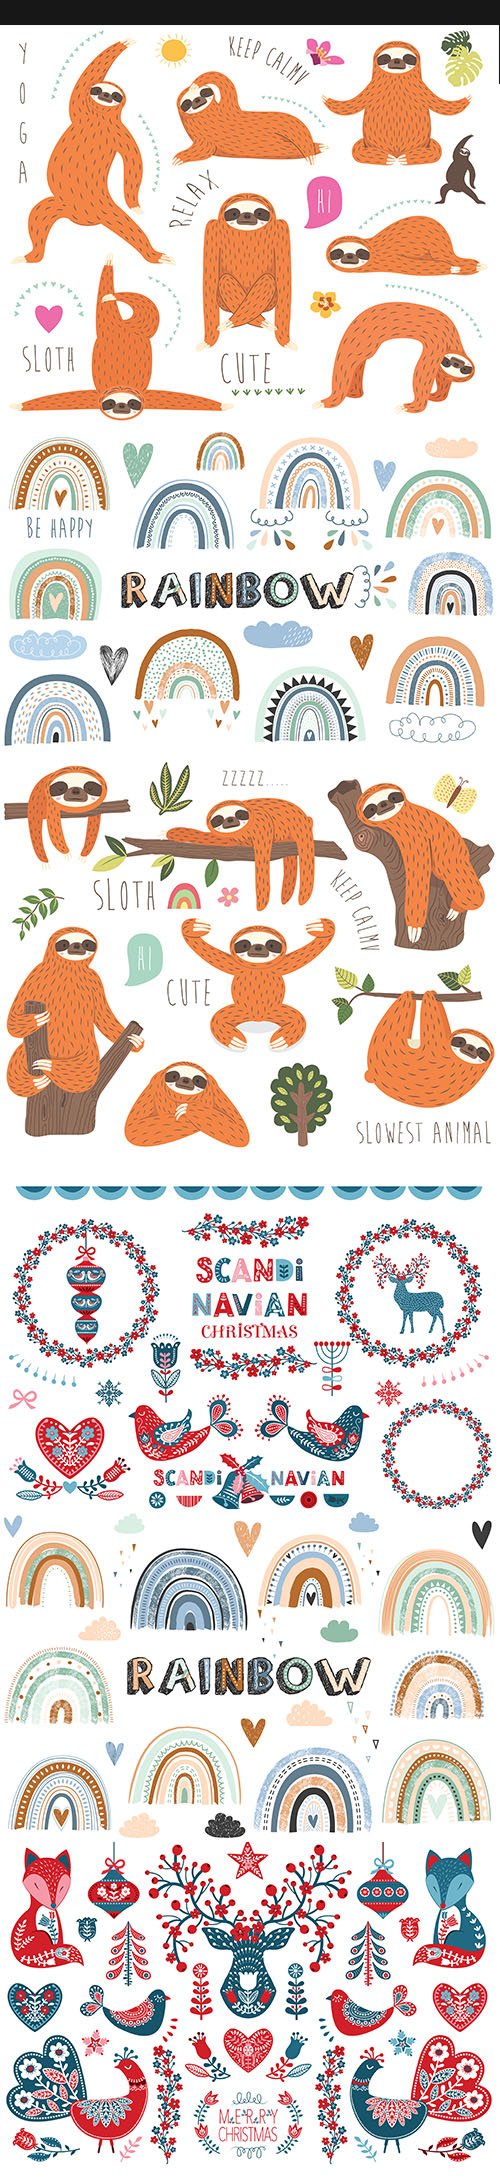 Collection of cute sloth illustration